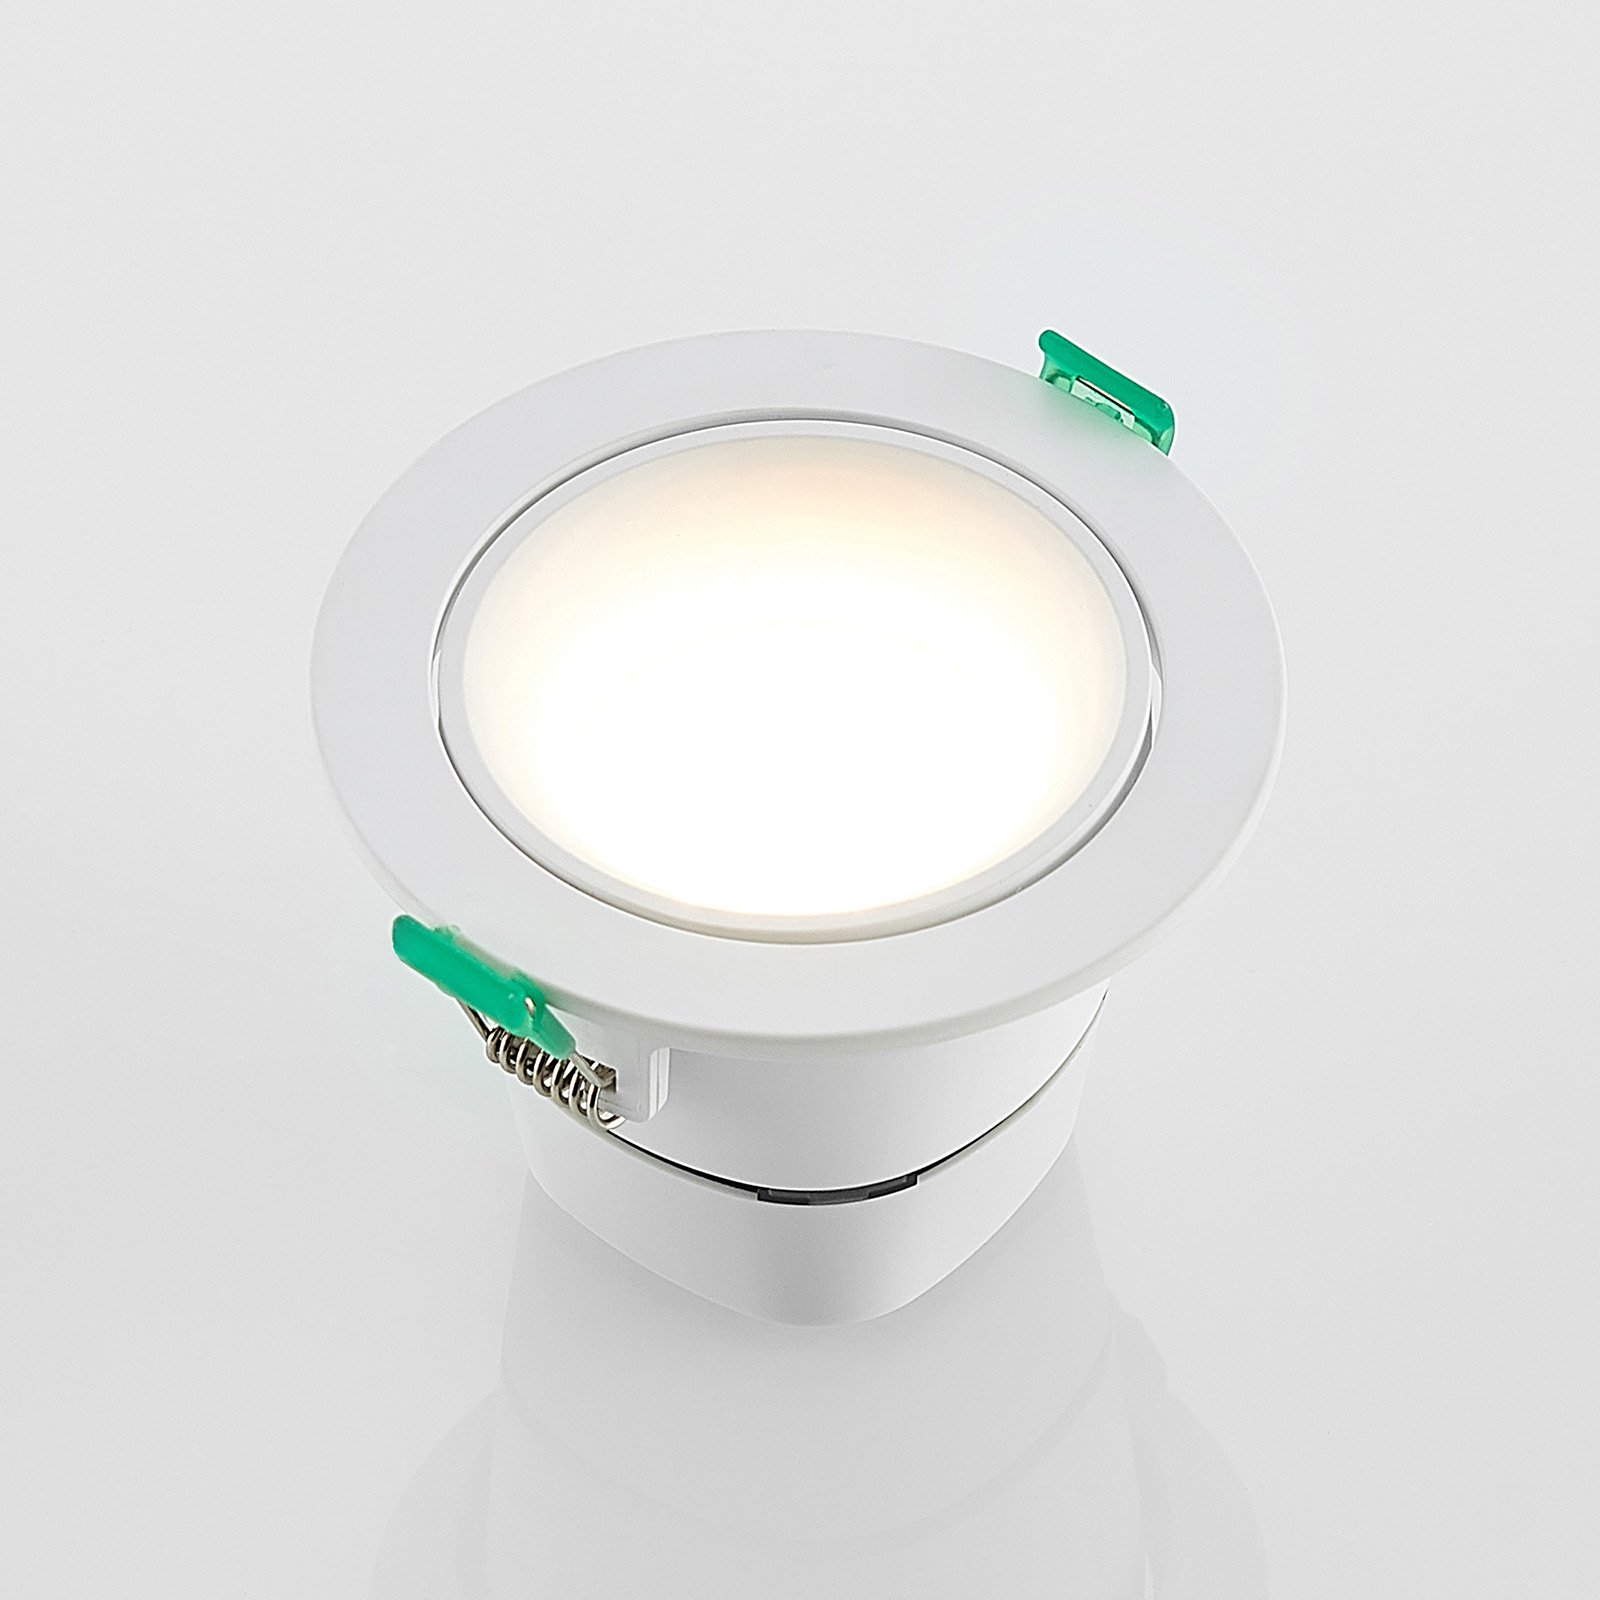 Arcchio Milaine lampe LED blanche, inclinable